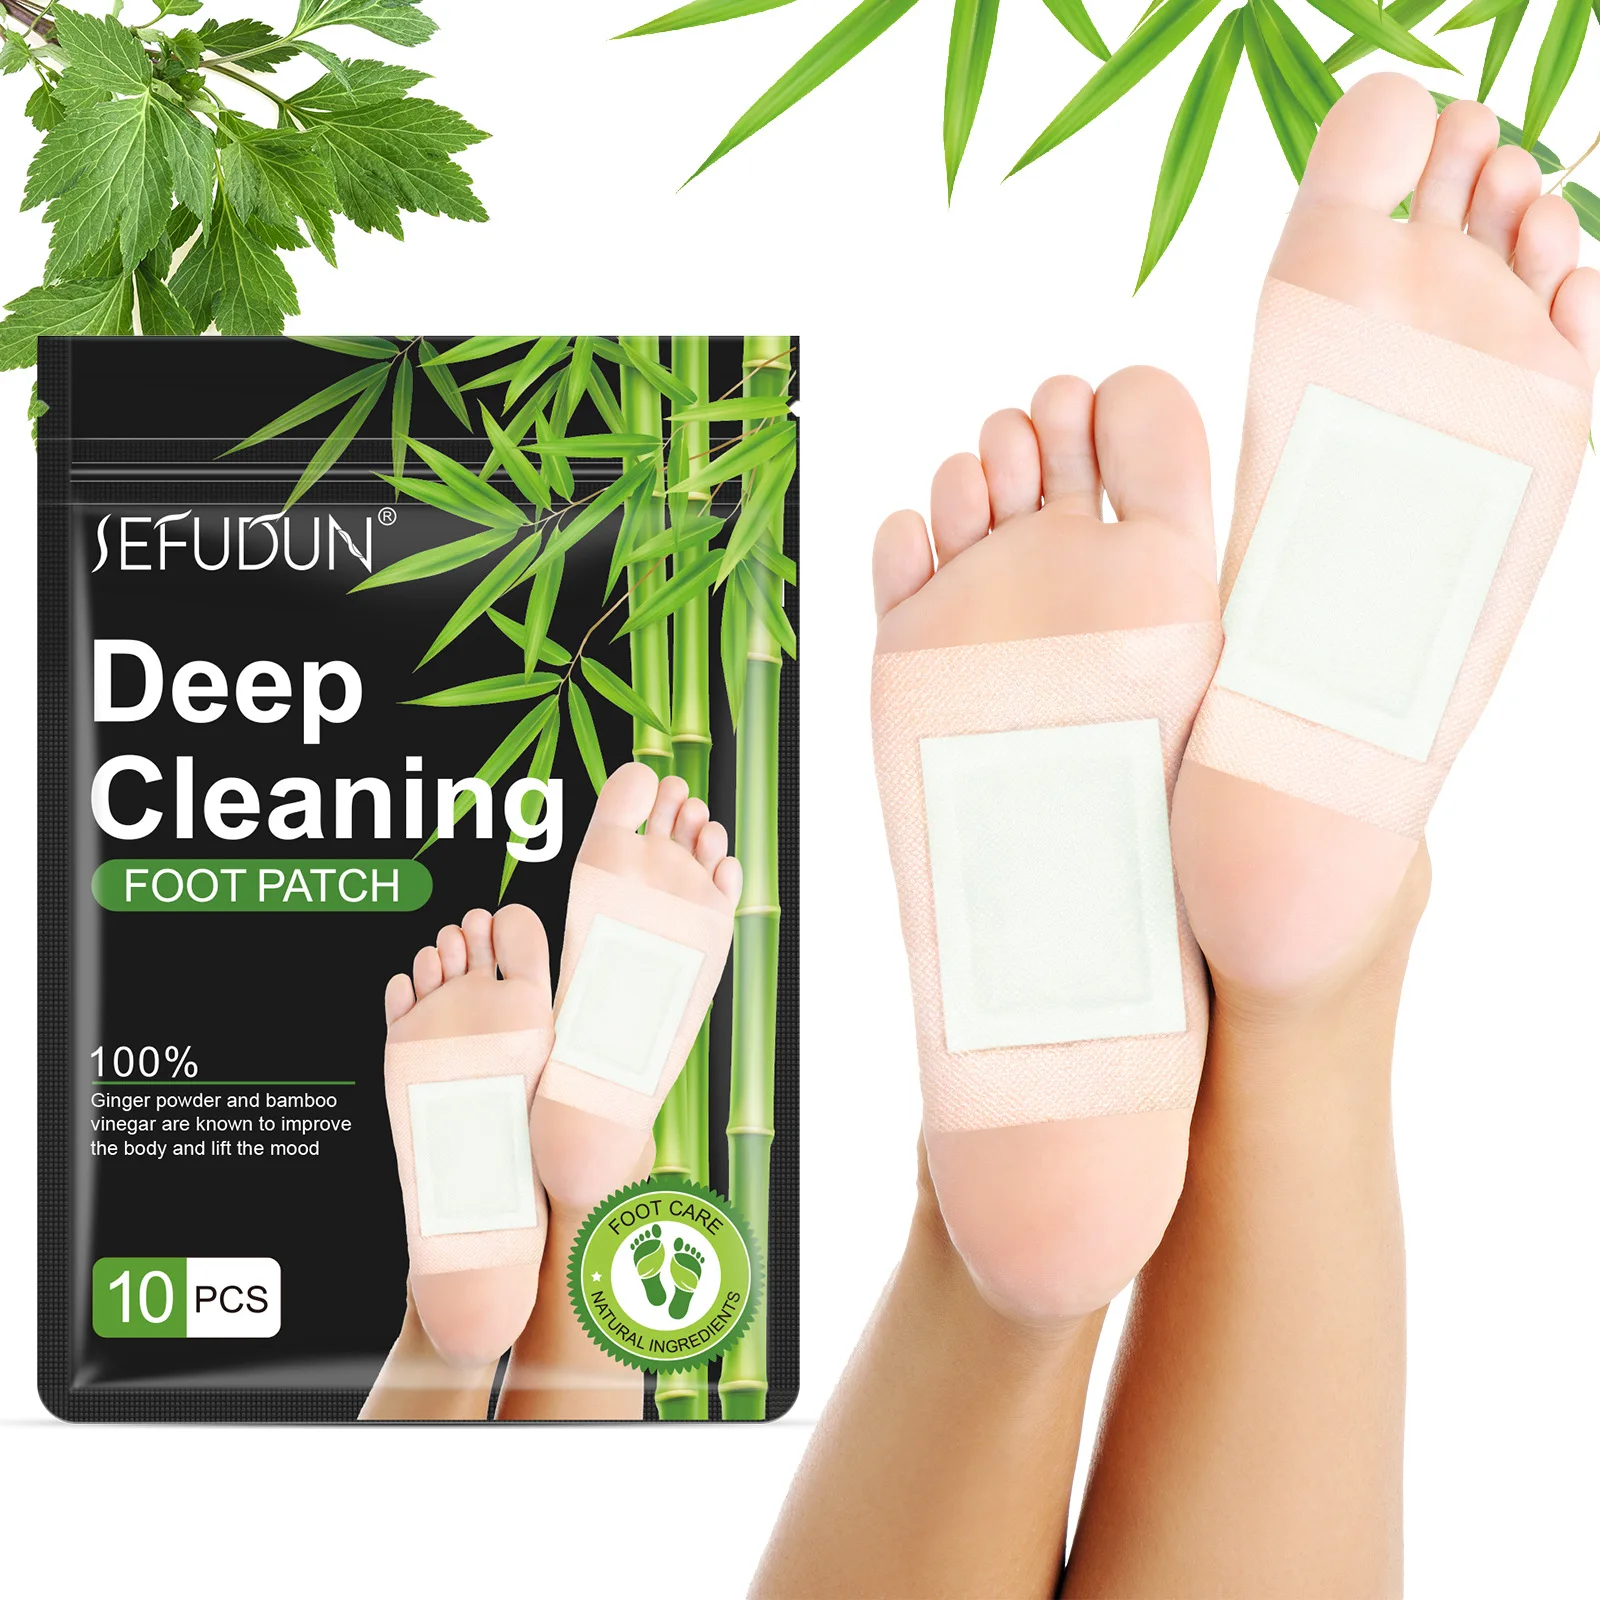 Relaxing and Rejuvenating Foot Patch by SEFUDUN - 10 Pcs/Bag